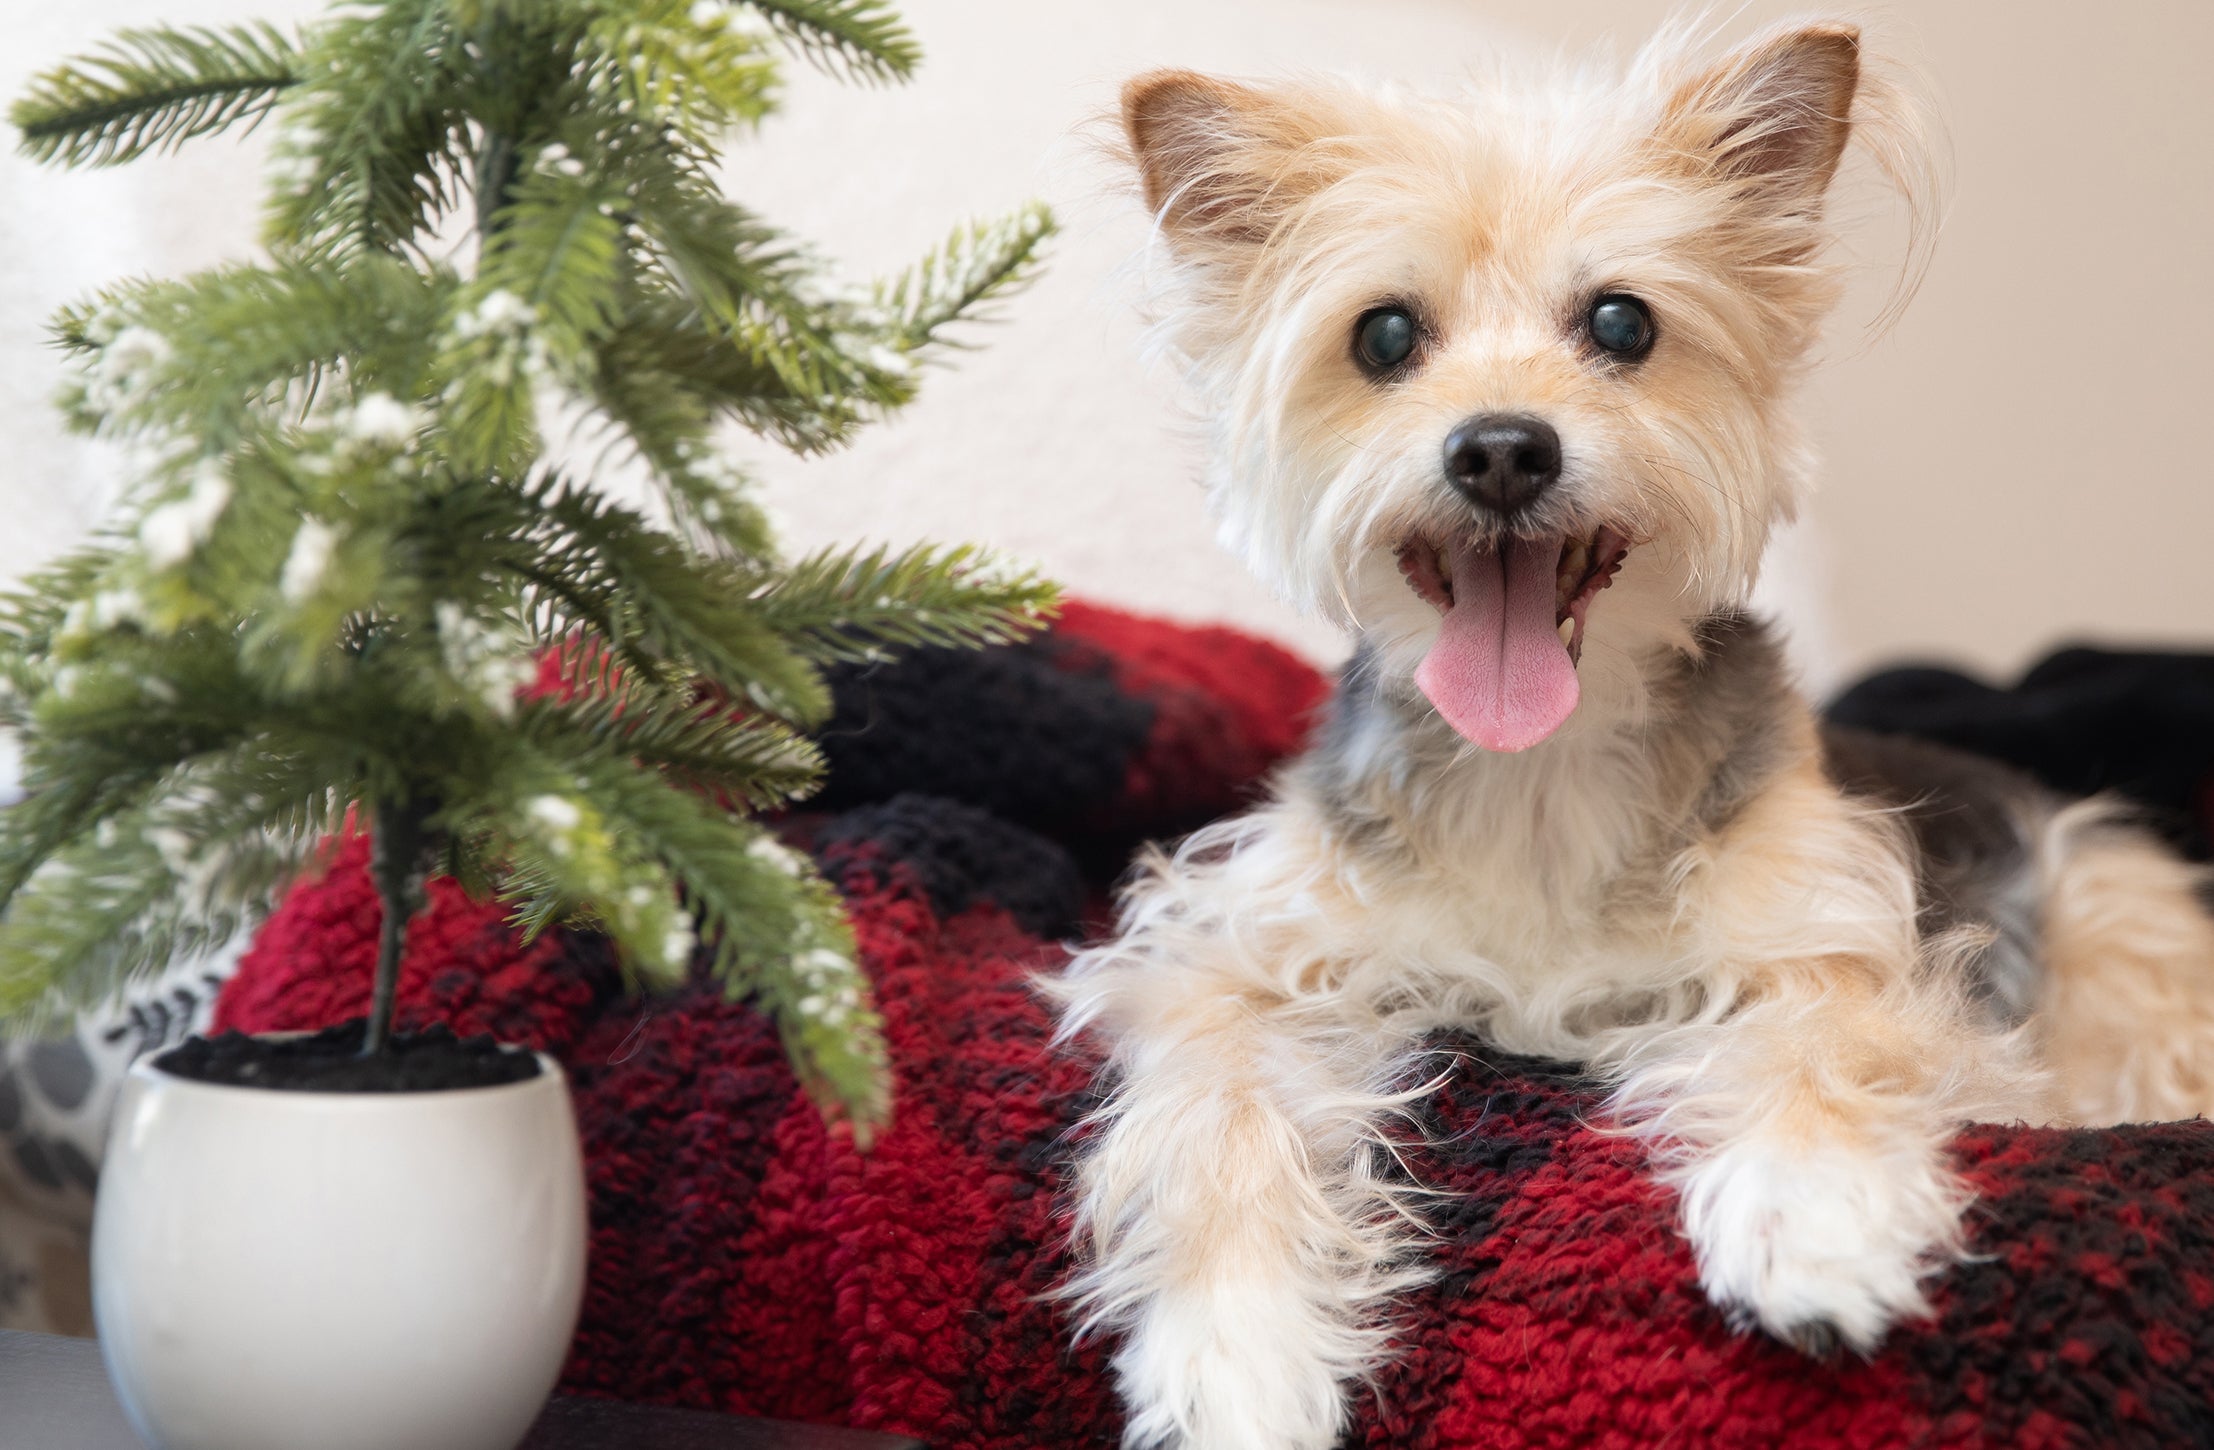 Small terrier dog with tongue out on red blanket next to a small pine tree